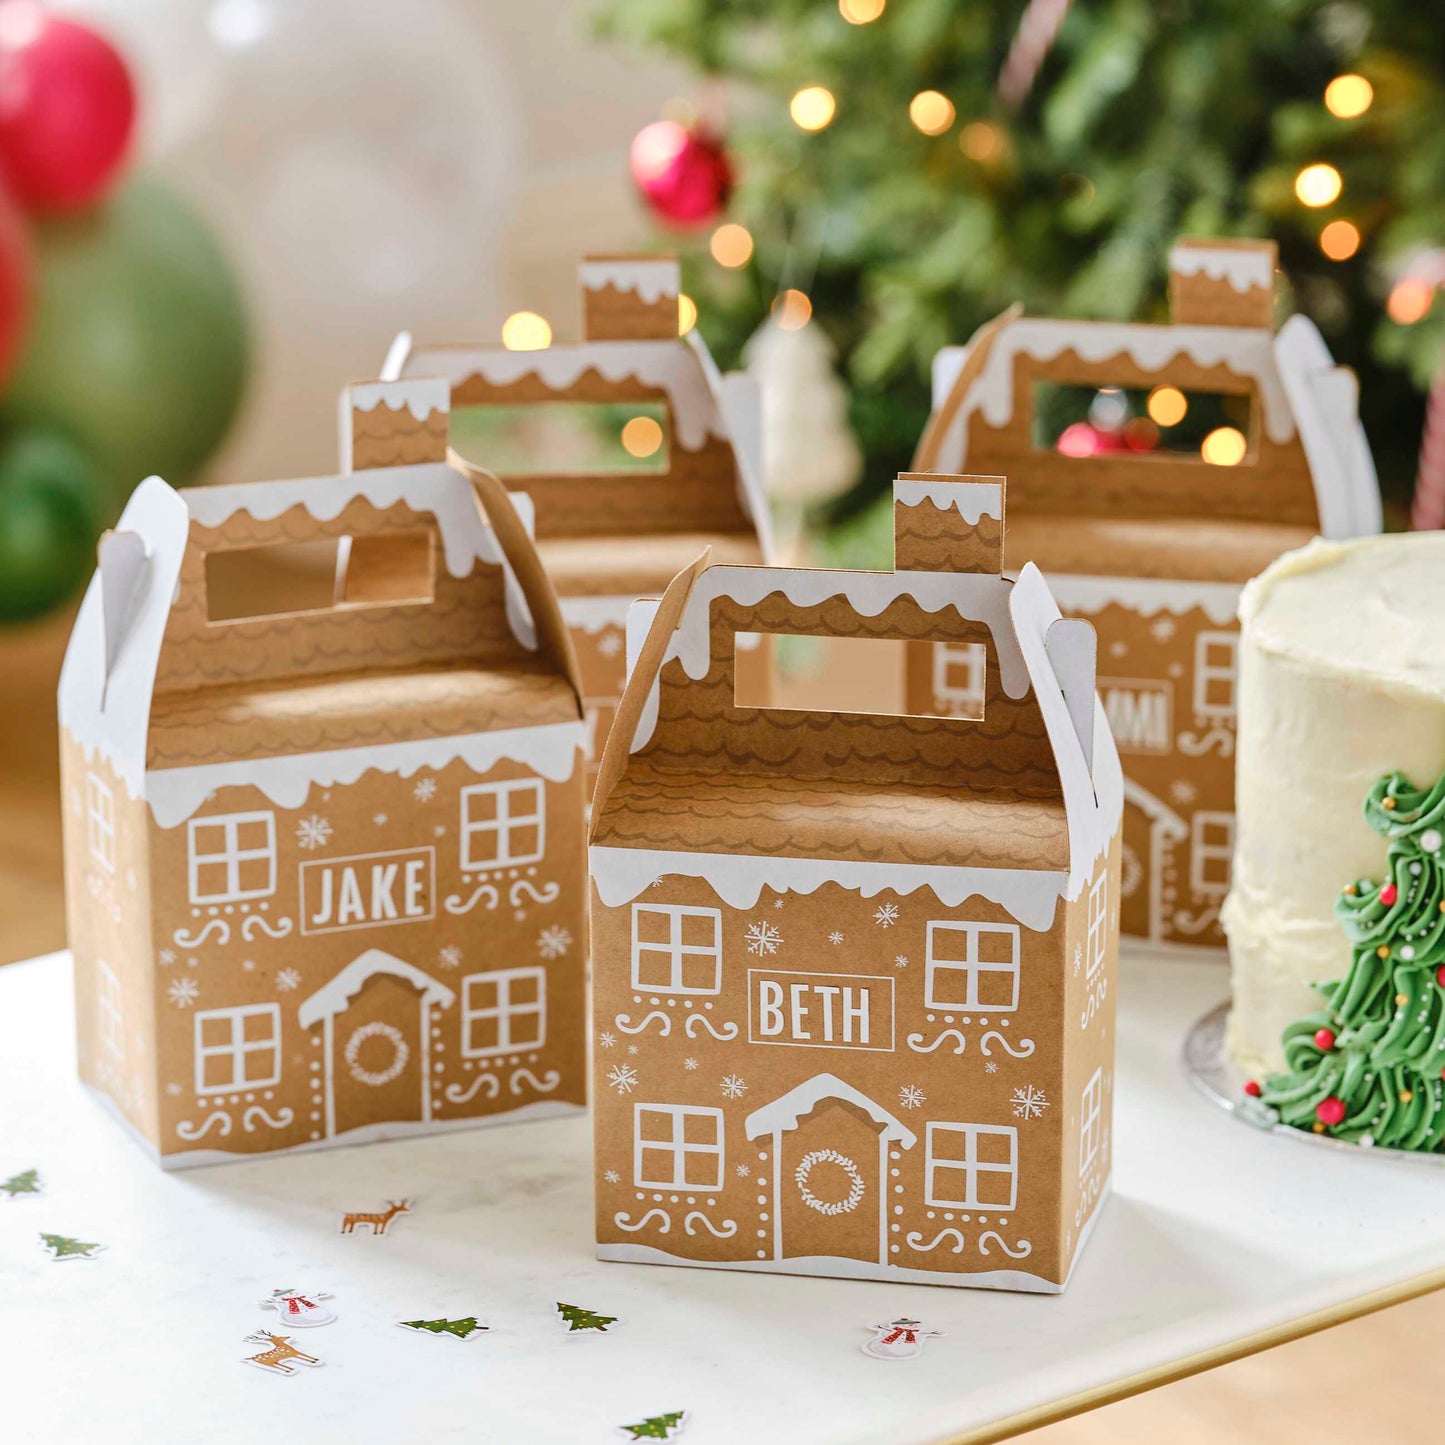 Customisable Gingerbread House Christmas Gift Boxes - Muddy Boots Home UK